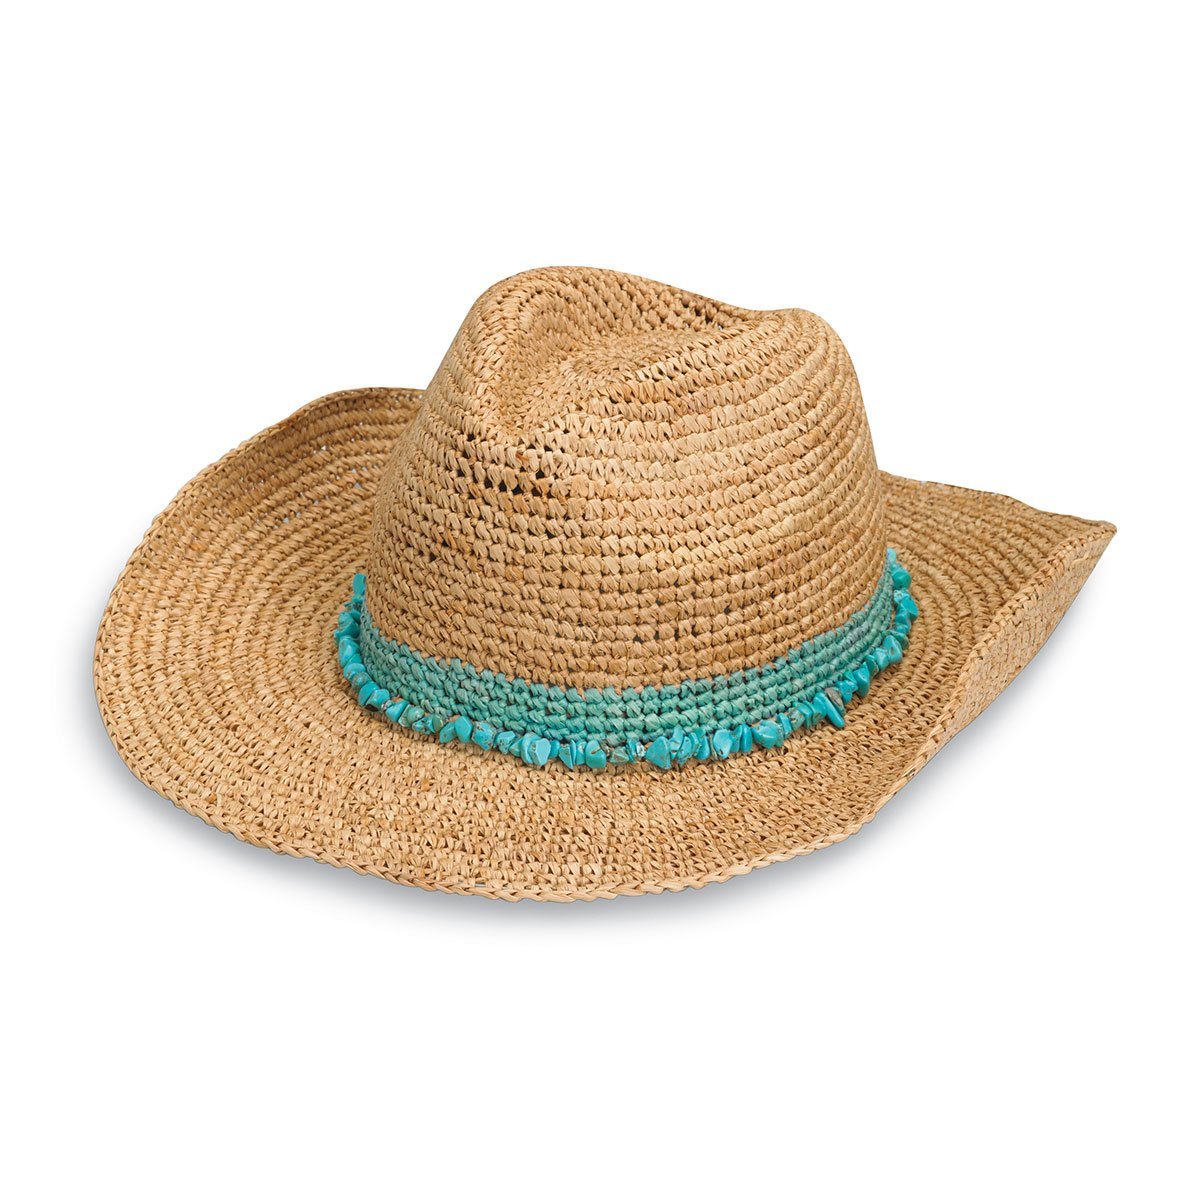 Featuring Front of Women's Adjustable Tahiti Cowboy Straw Sun Hat in Turquoise from Wallaroo